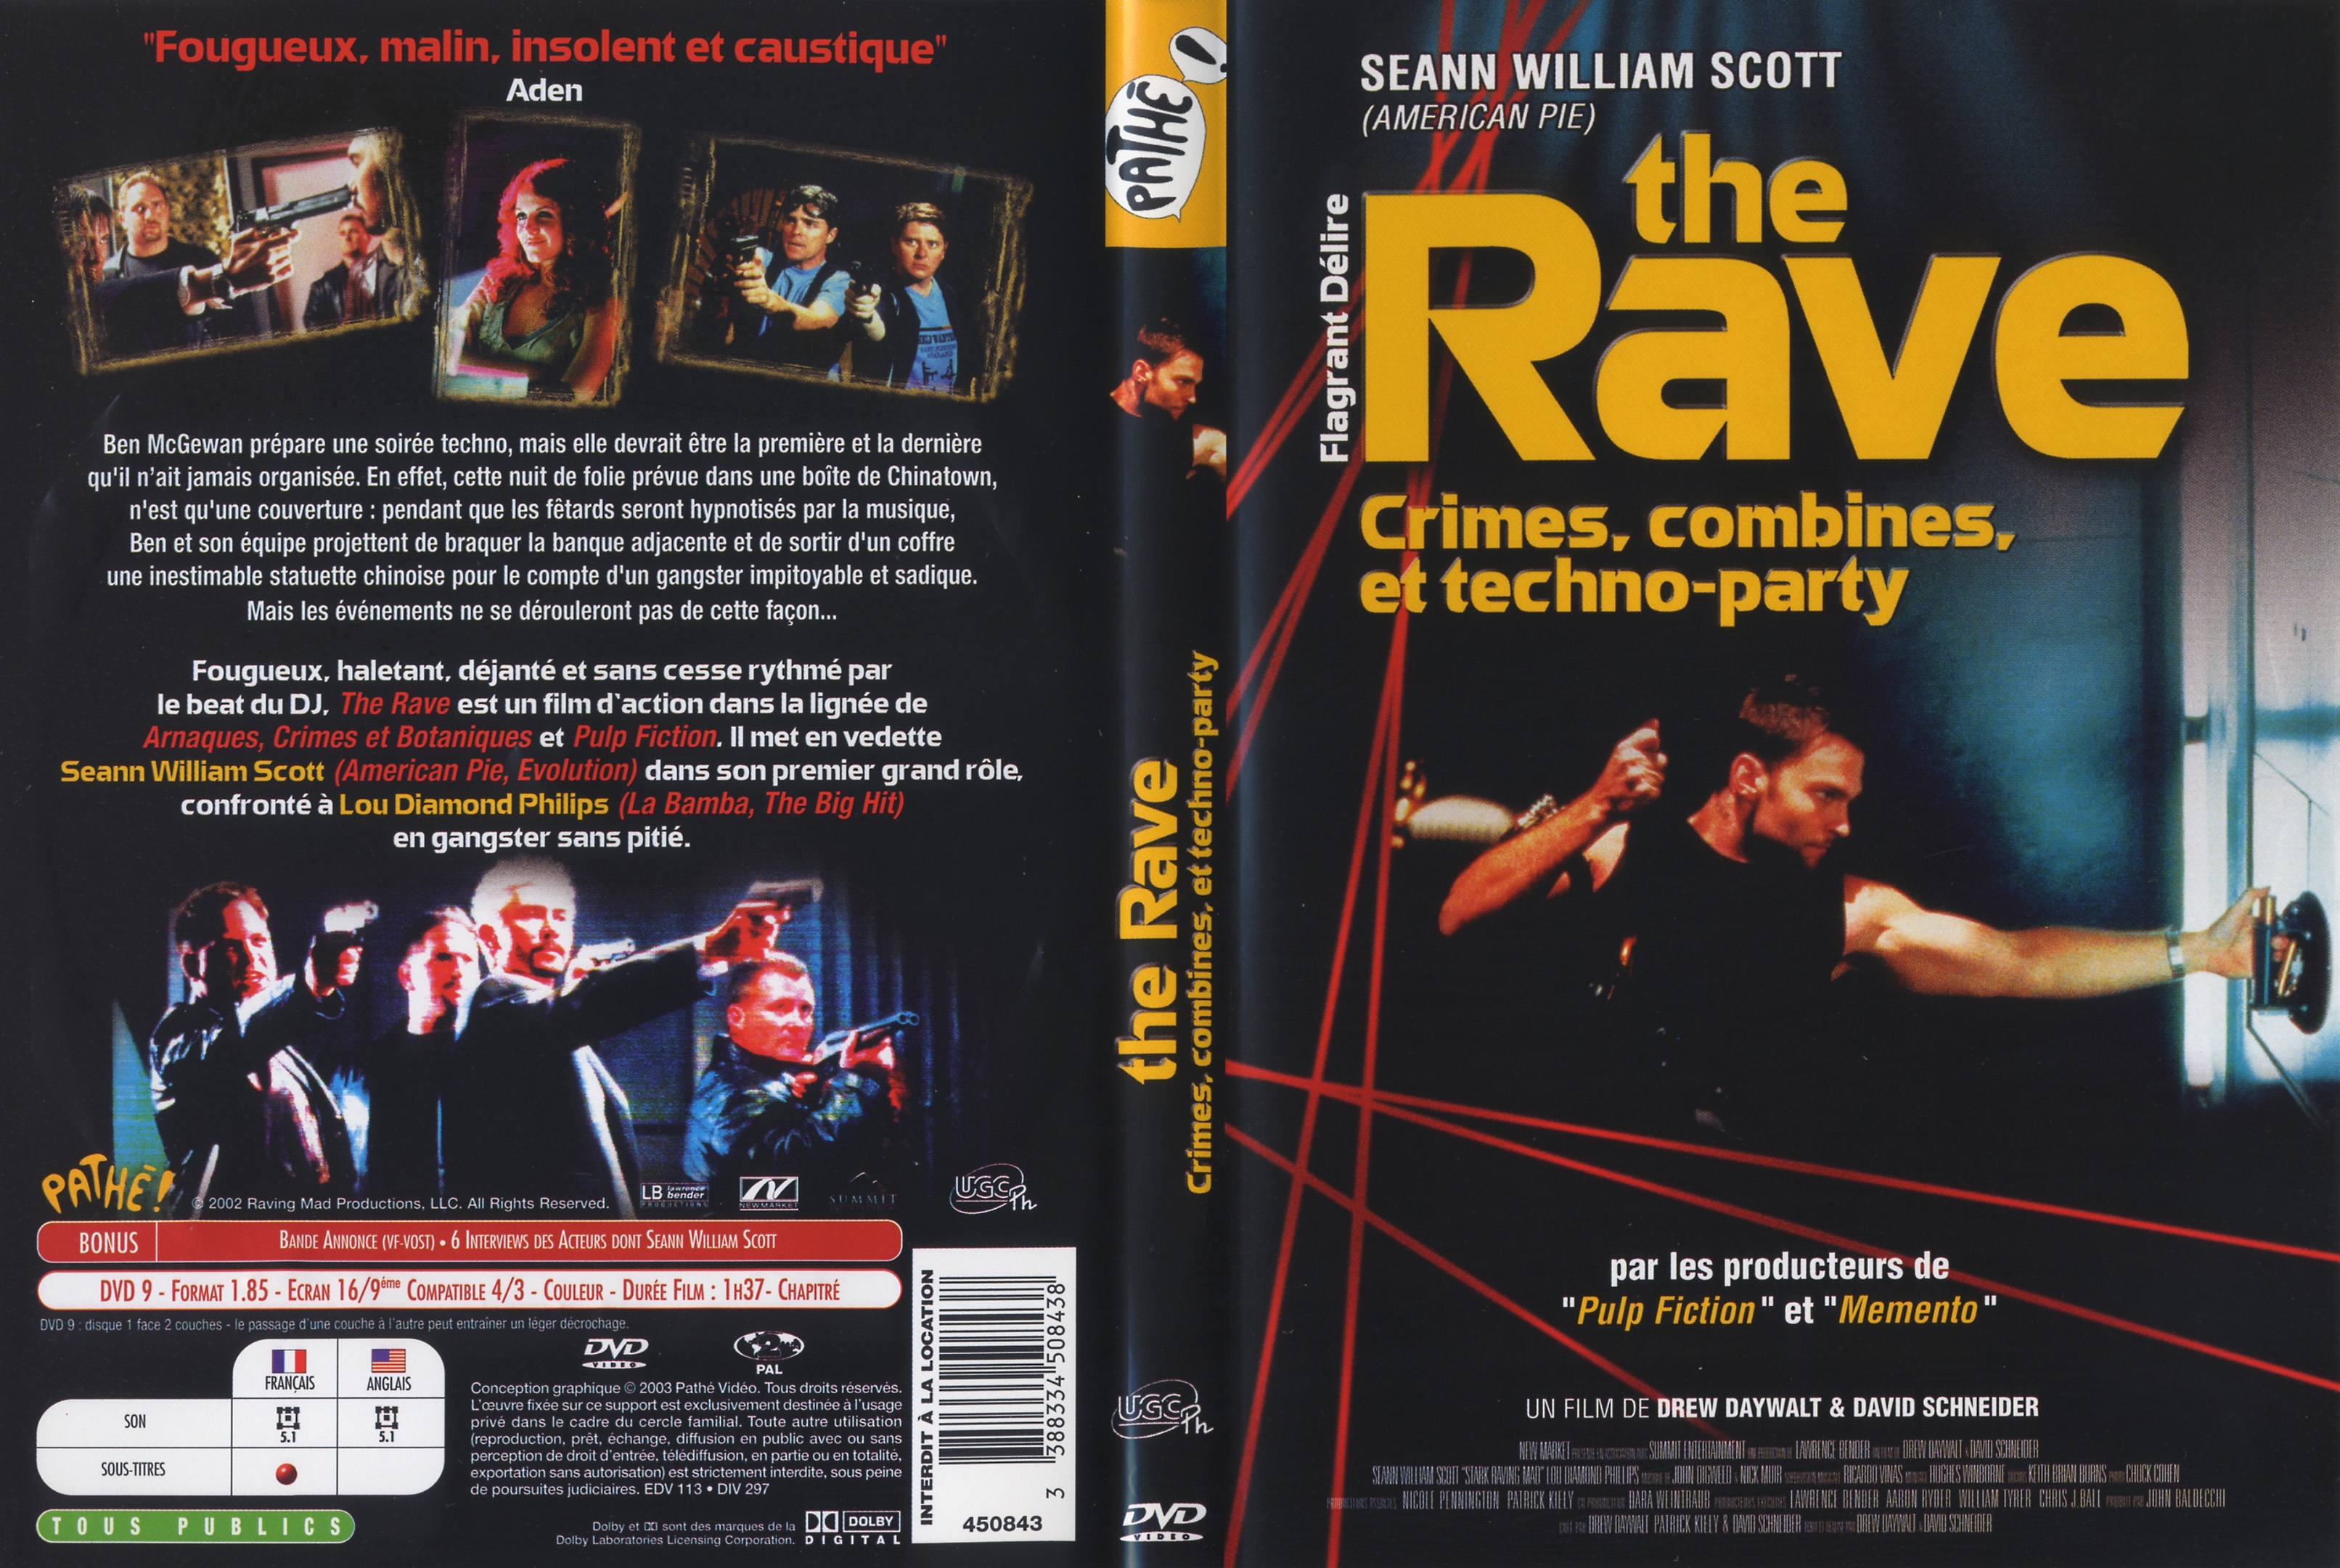 Jaquette DVD The rave